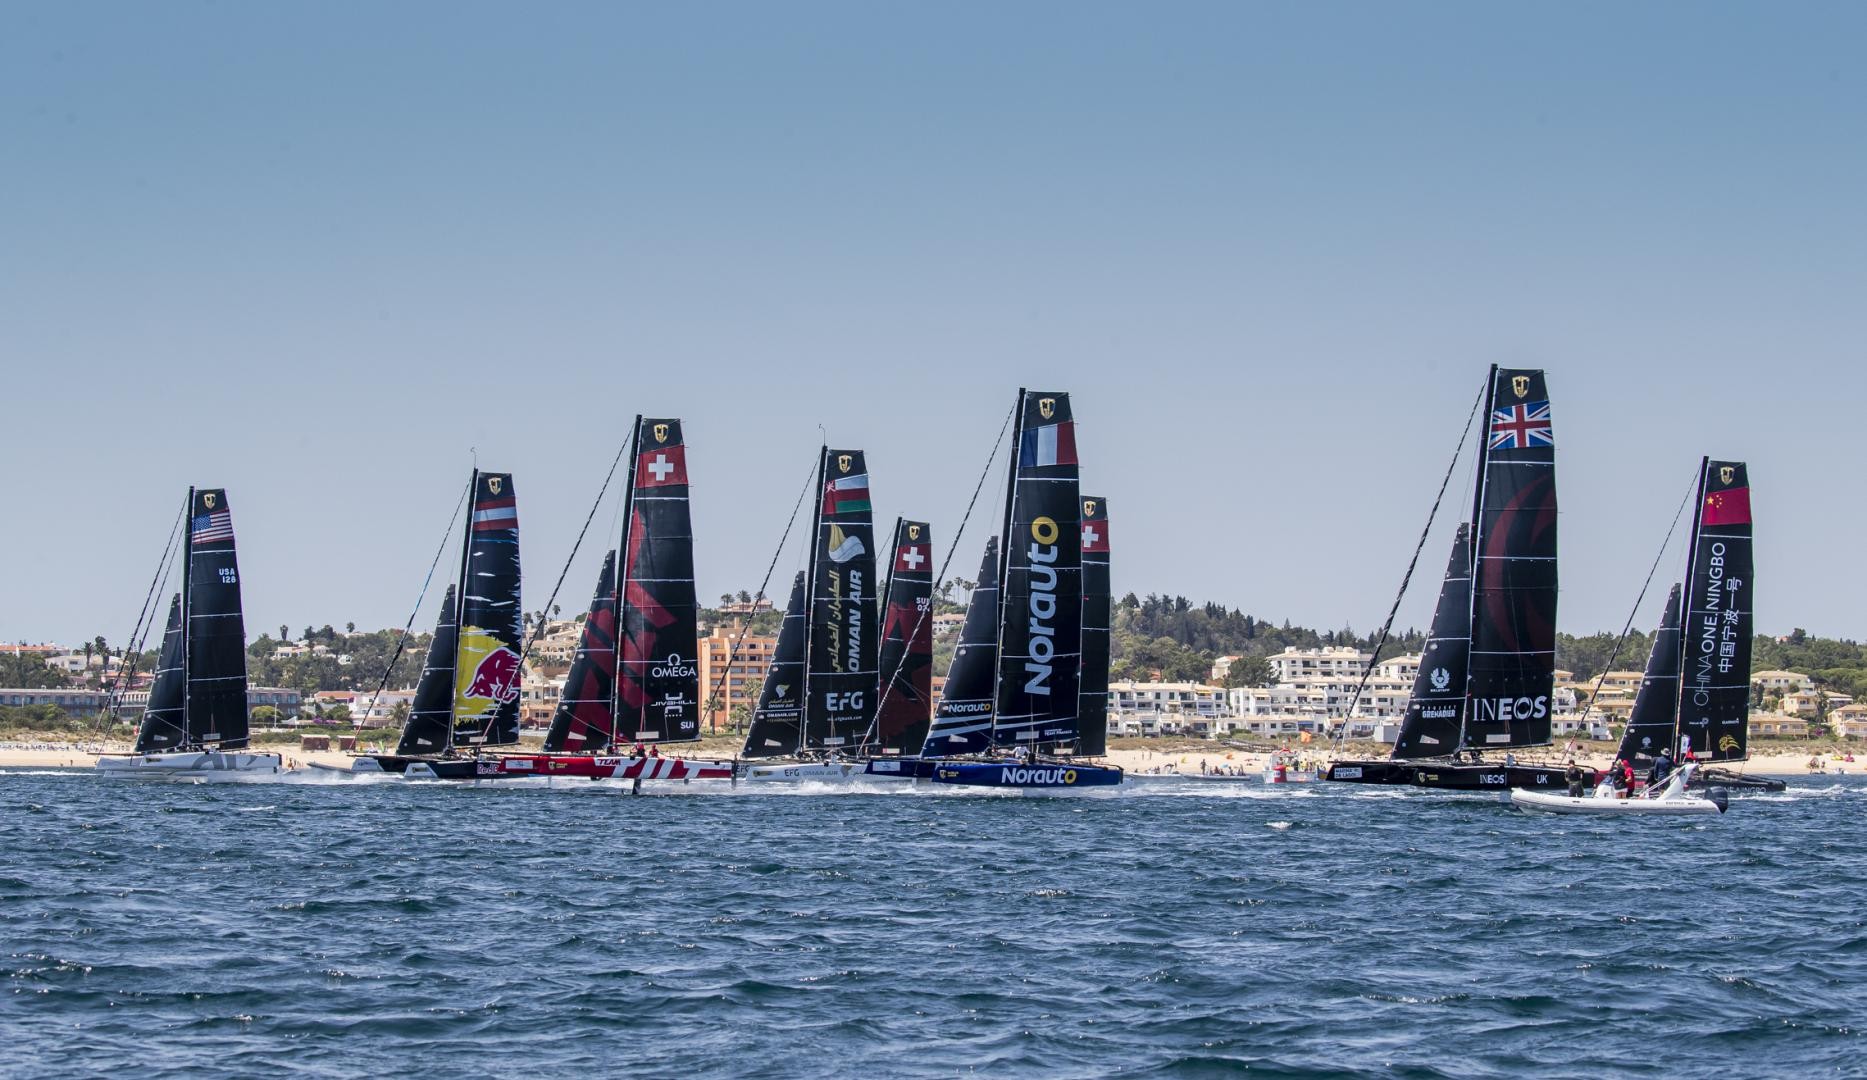 Ten world class teams are competing at this year's GC32 World Championship in Lagos, Portugal.